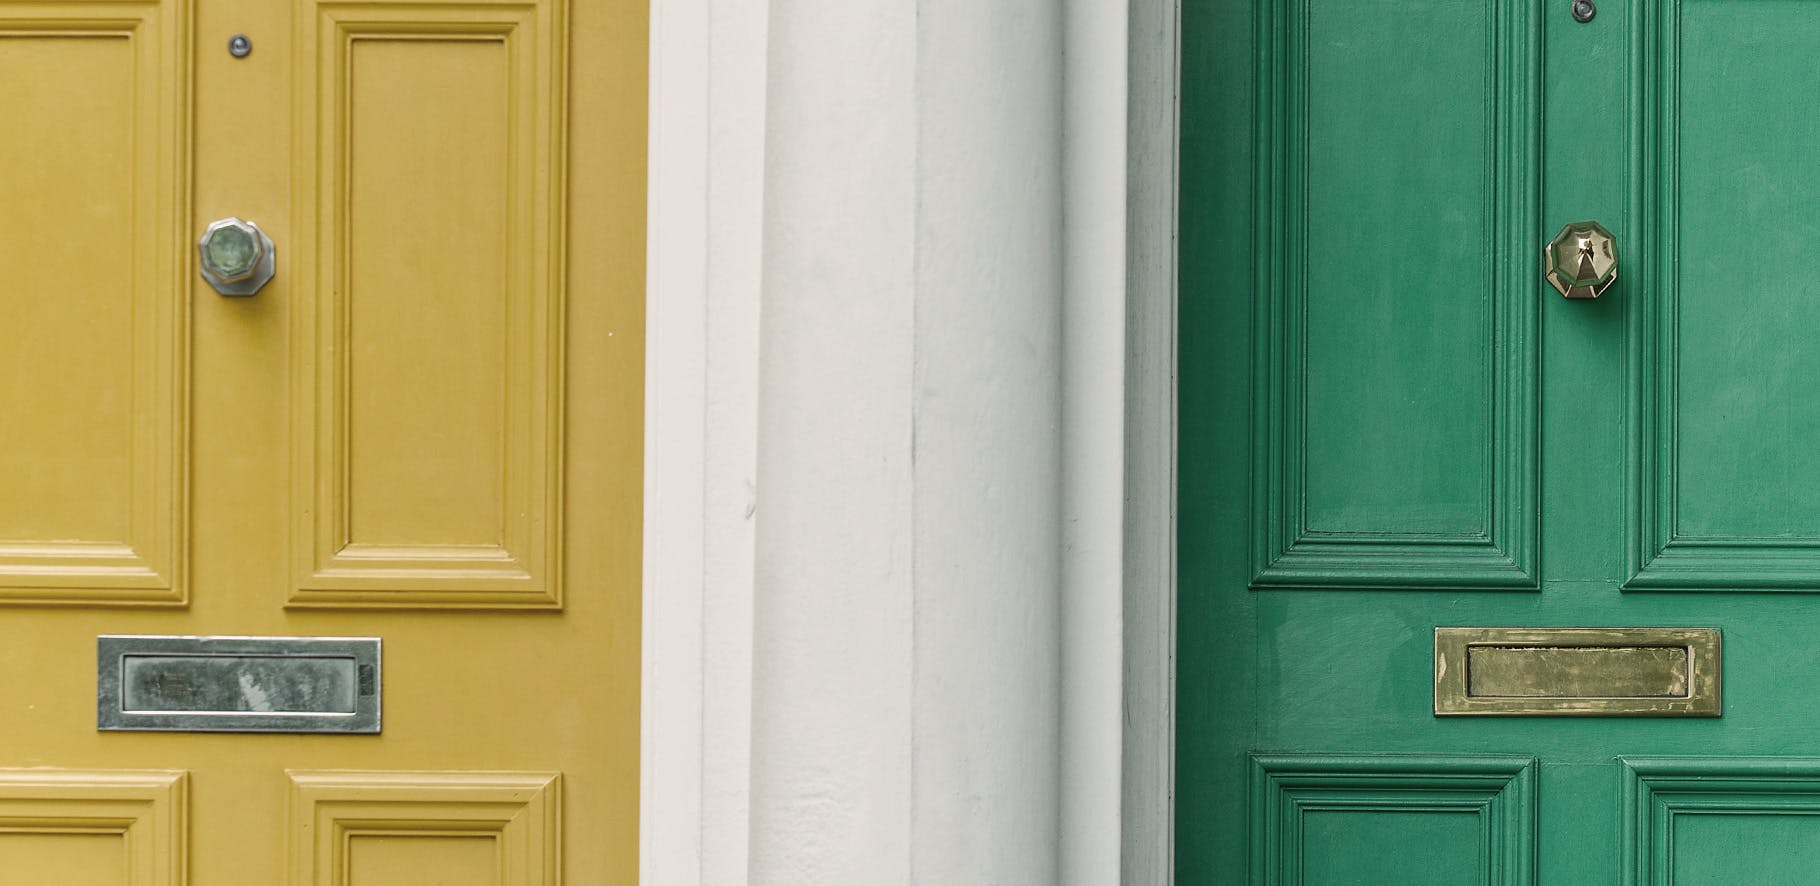 two doors are seperated by a white wall, there is a yellow door on the left and a green door on the right.